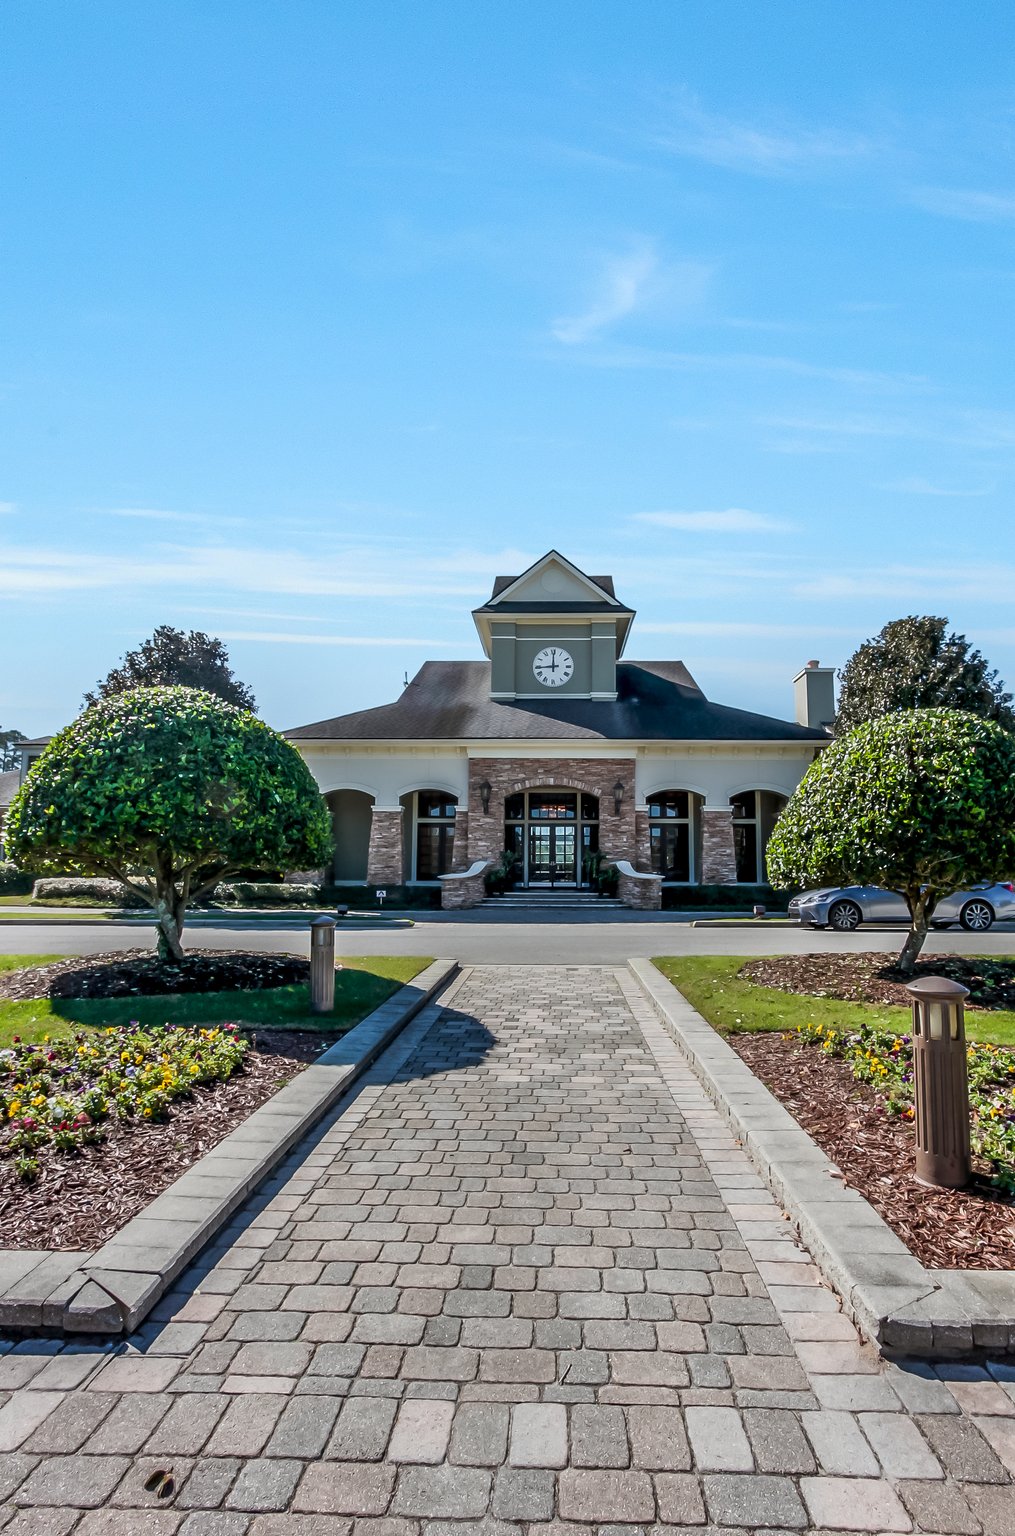 St Johns Golf & Country Club